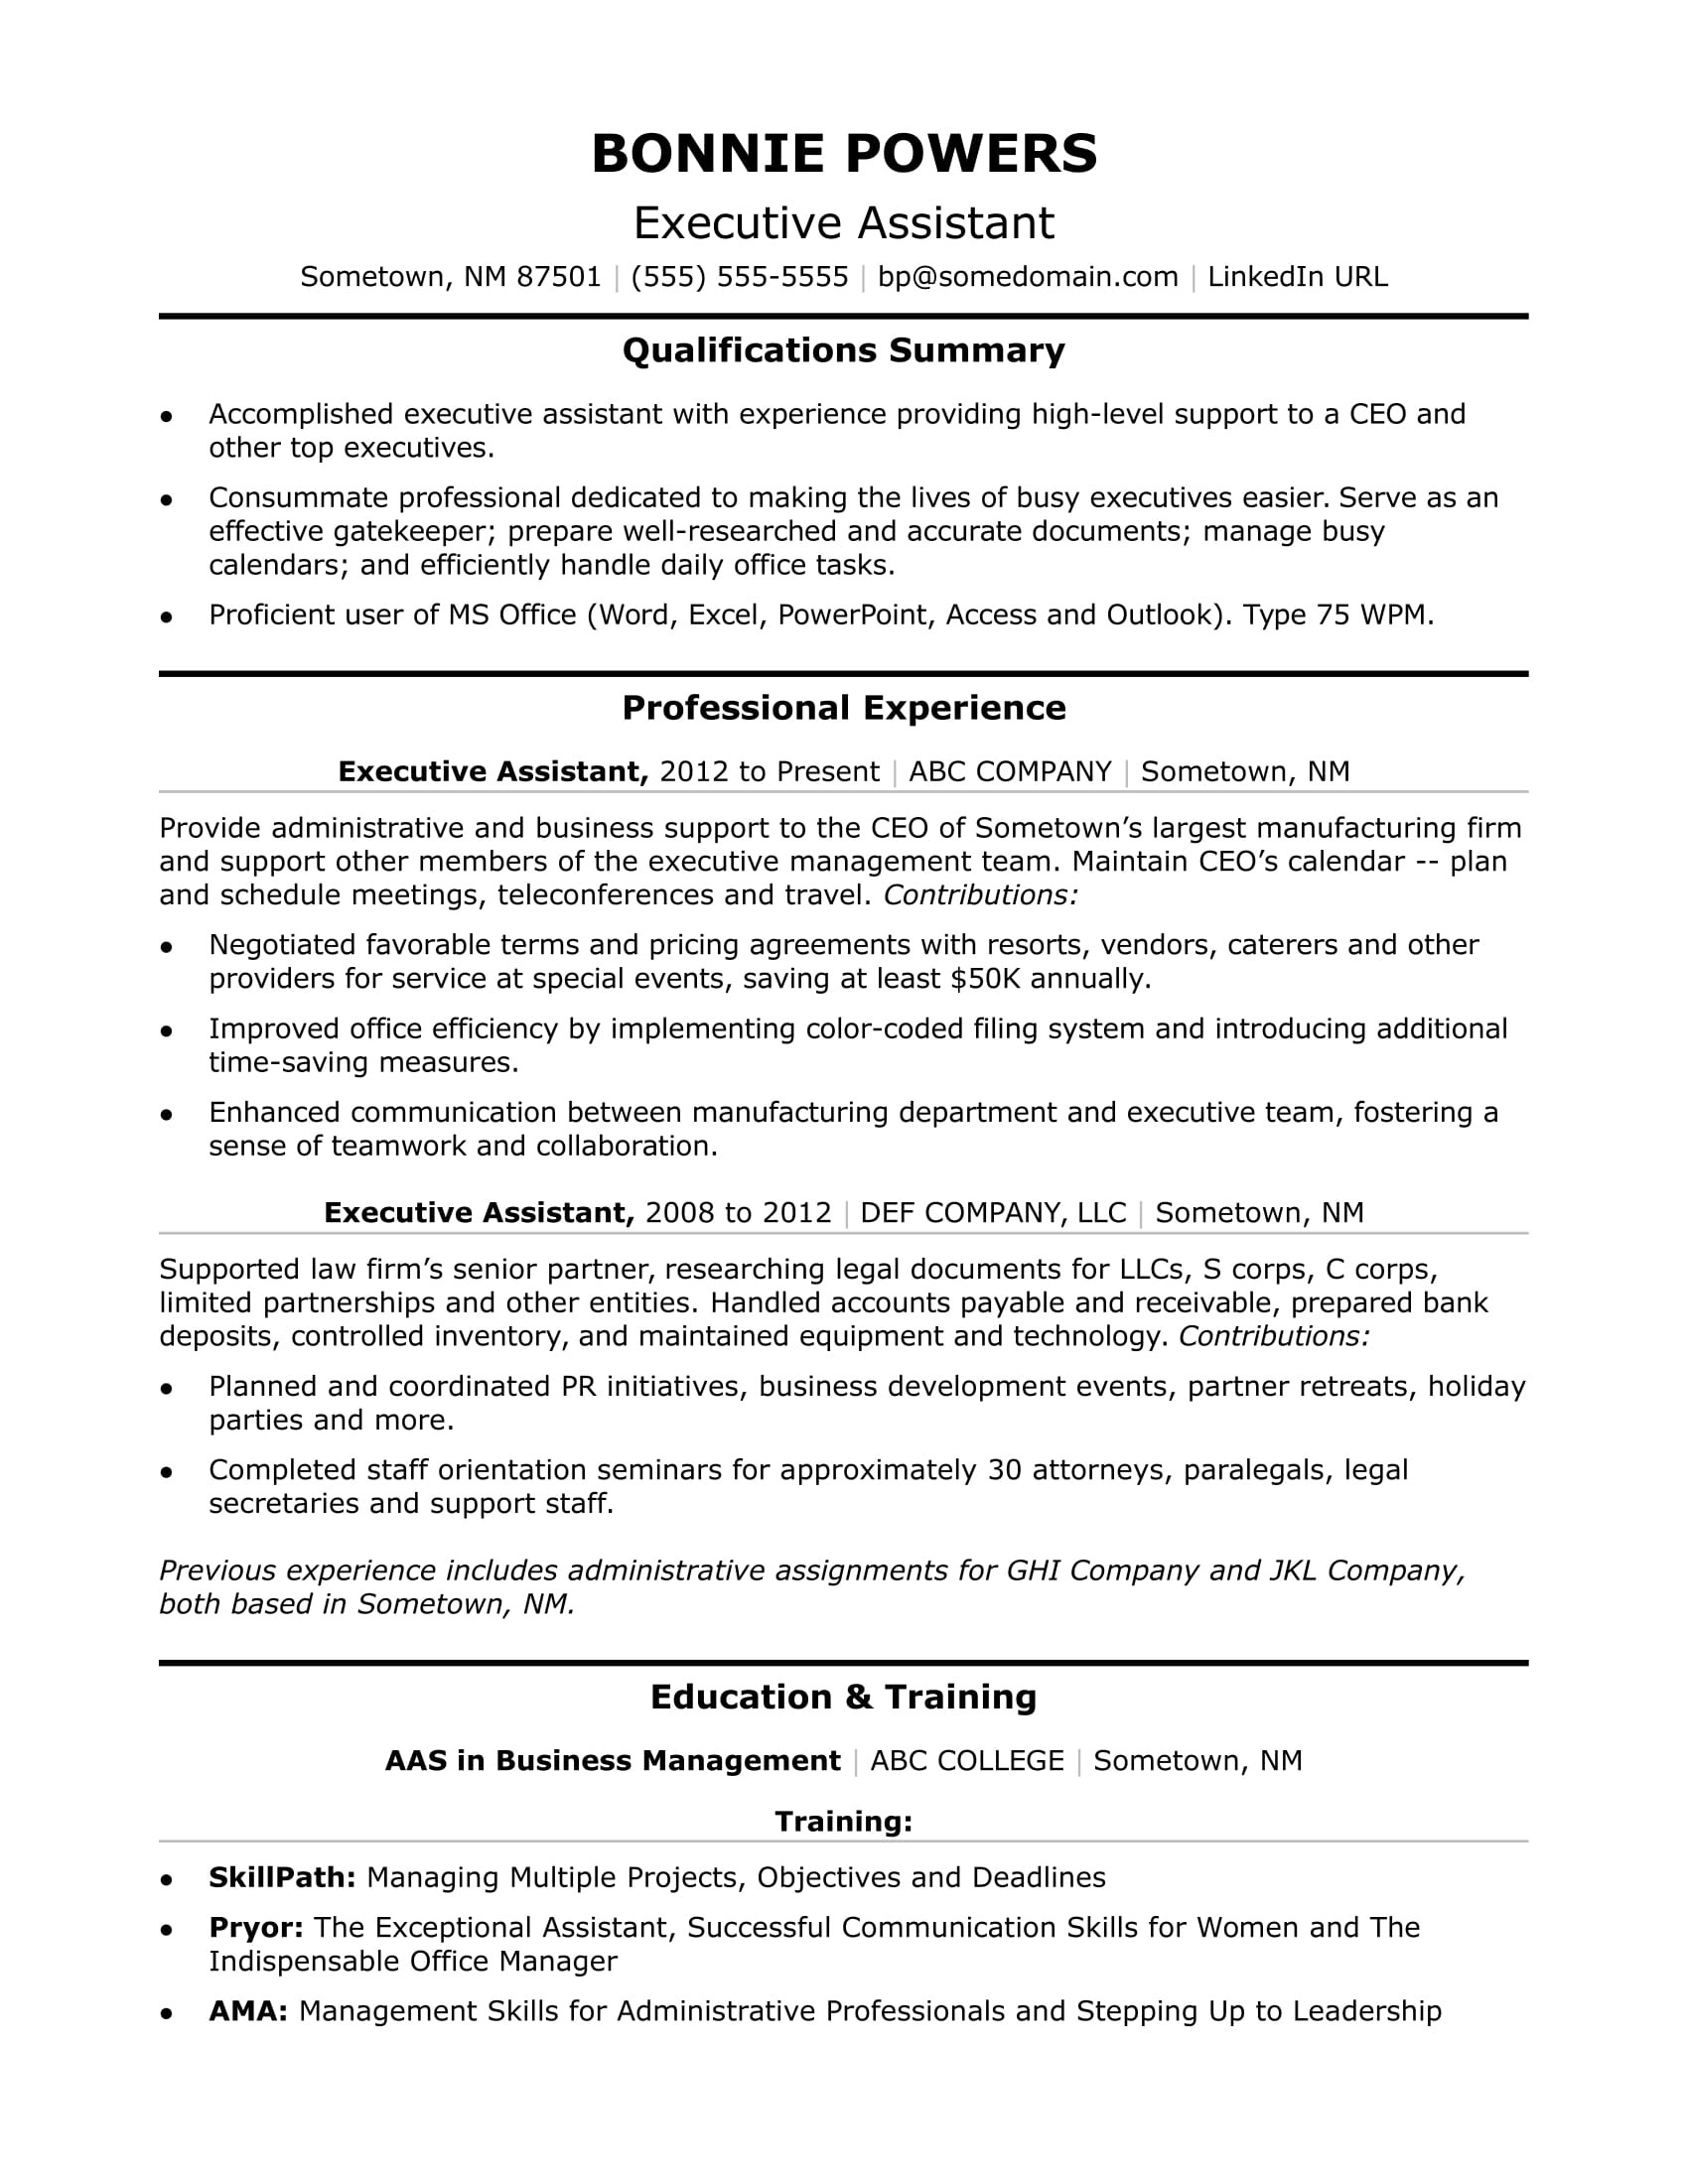 Sample Resume for Bank Back Office Executive Executive assistant Resume Monster.com